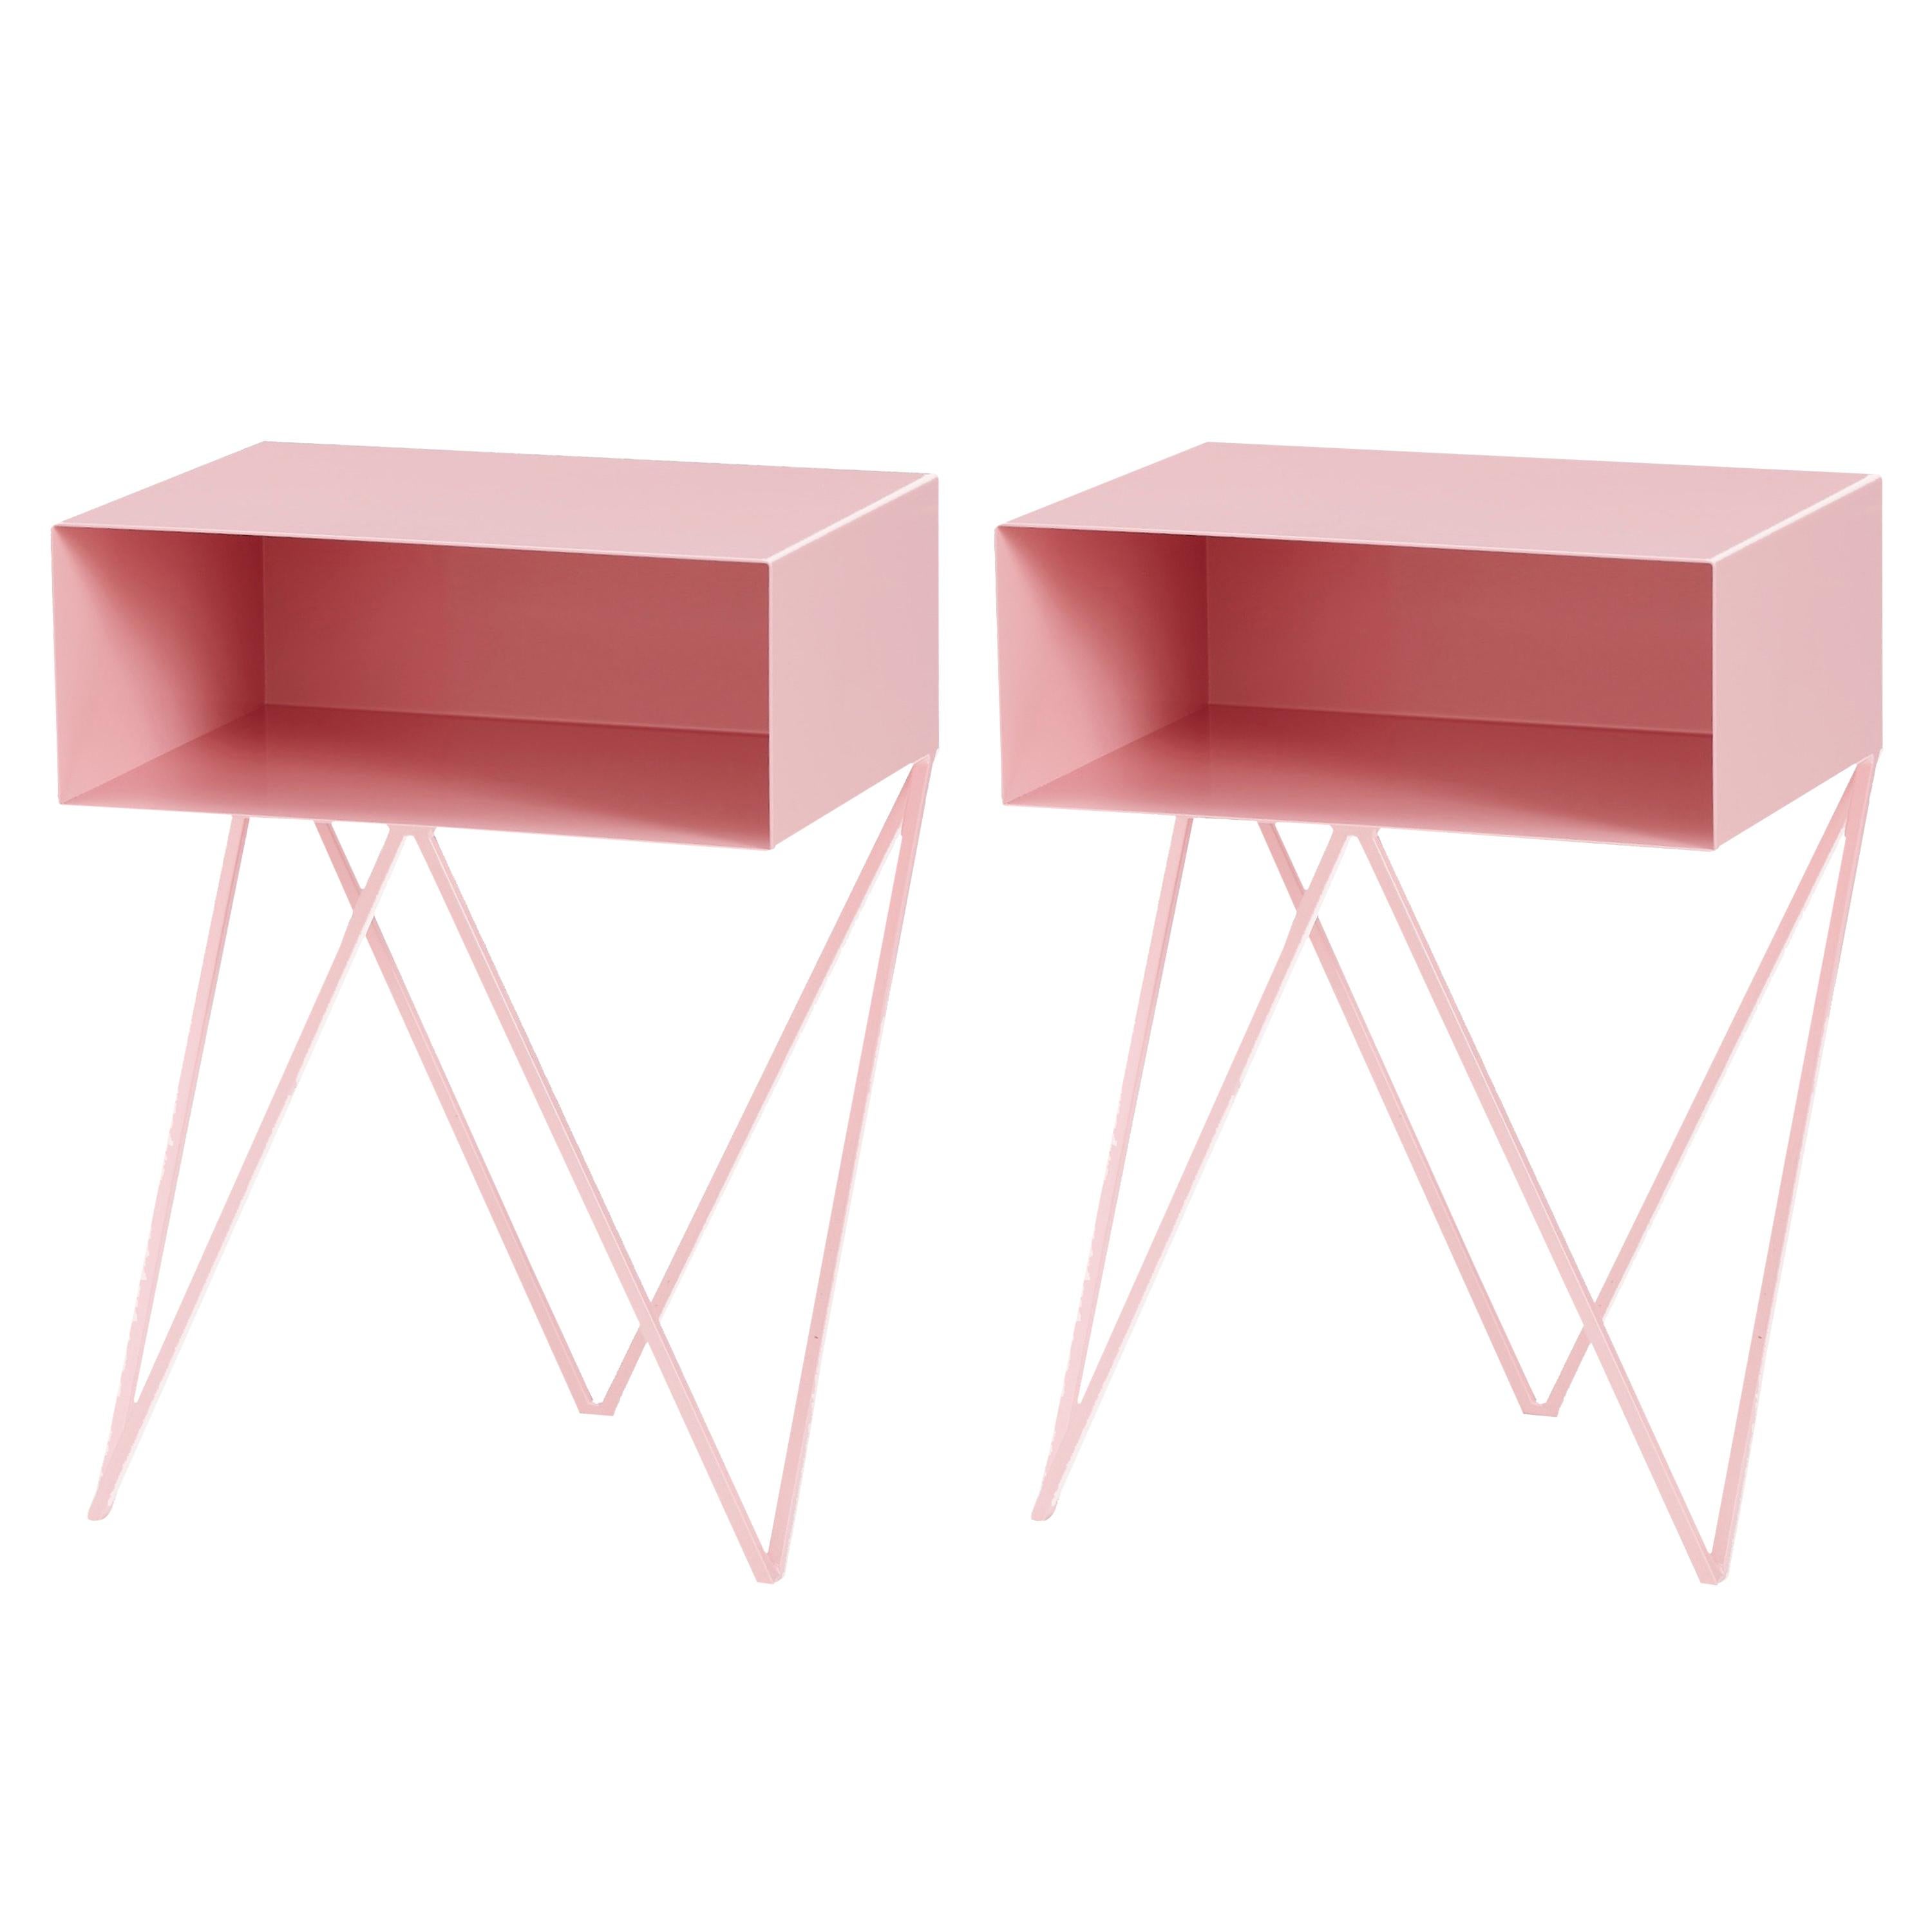 Pair of Pink Steel Robot Bedside Tables - Pair of Side Table Nightstands